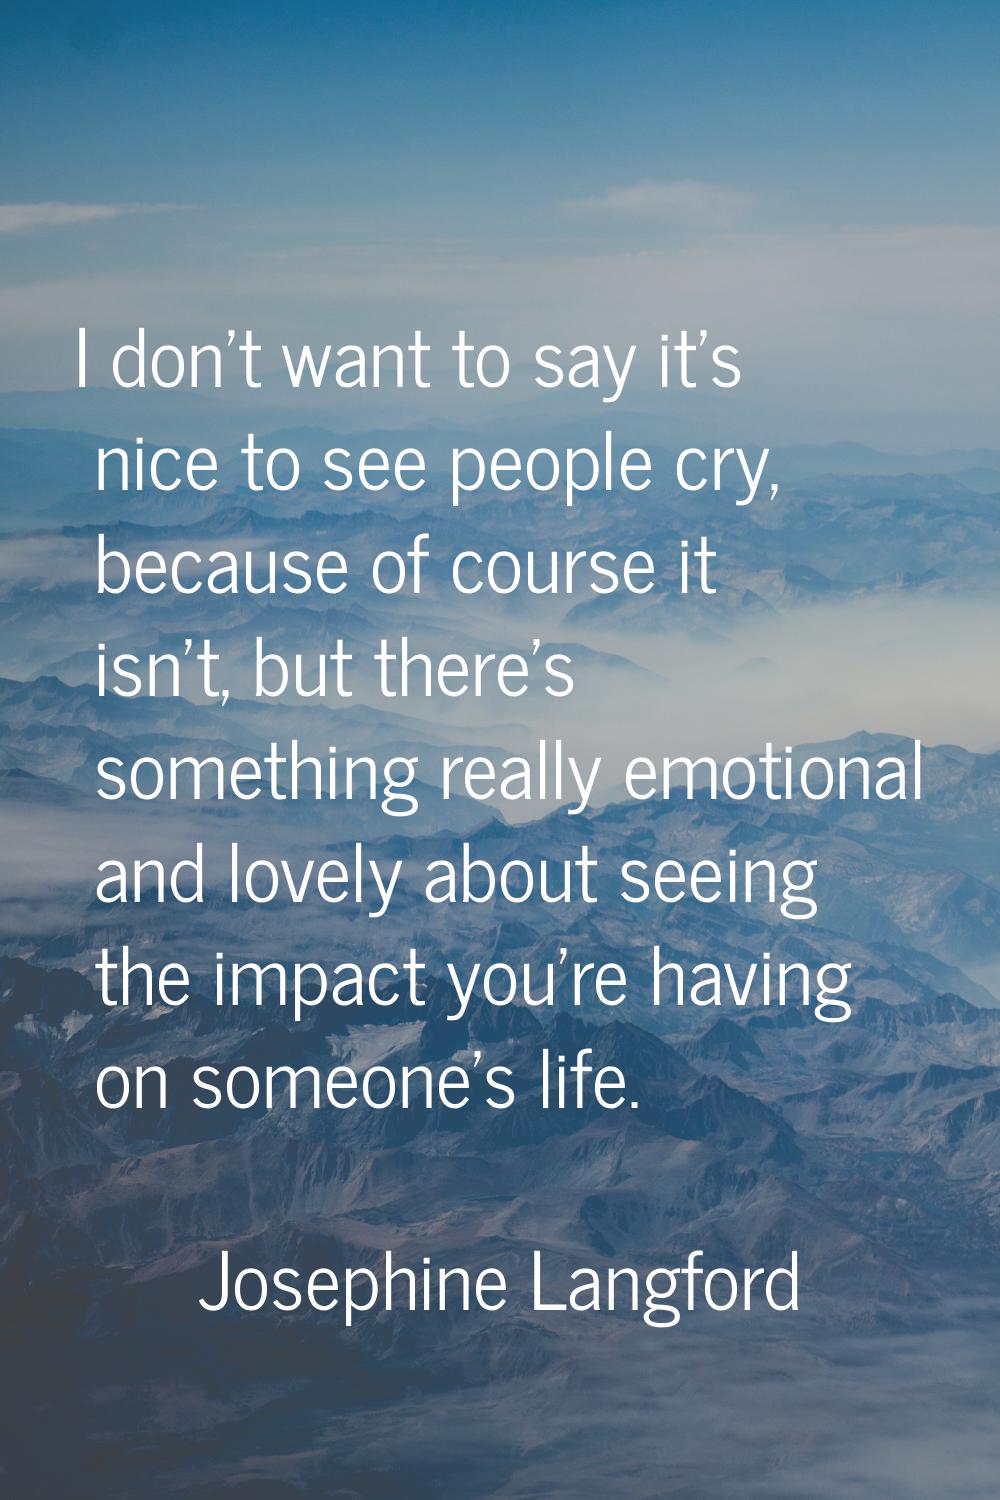 I don't want to say it's nice to see people cry, because of course it isn't, but there's something 